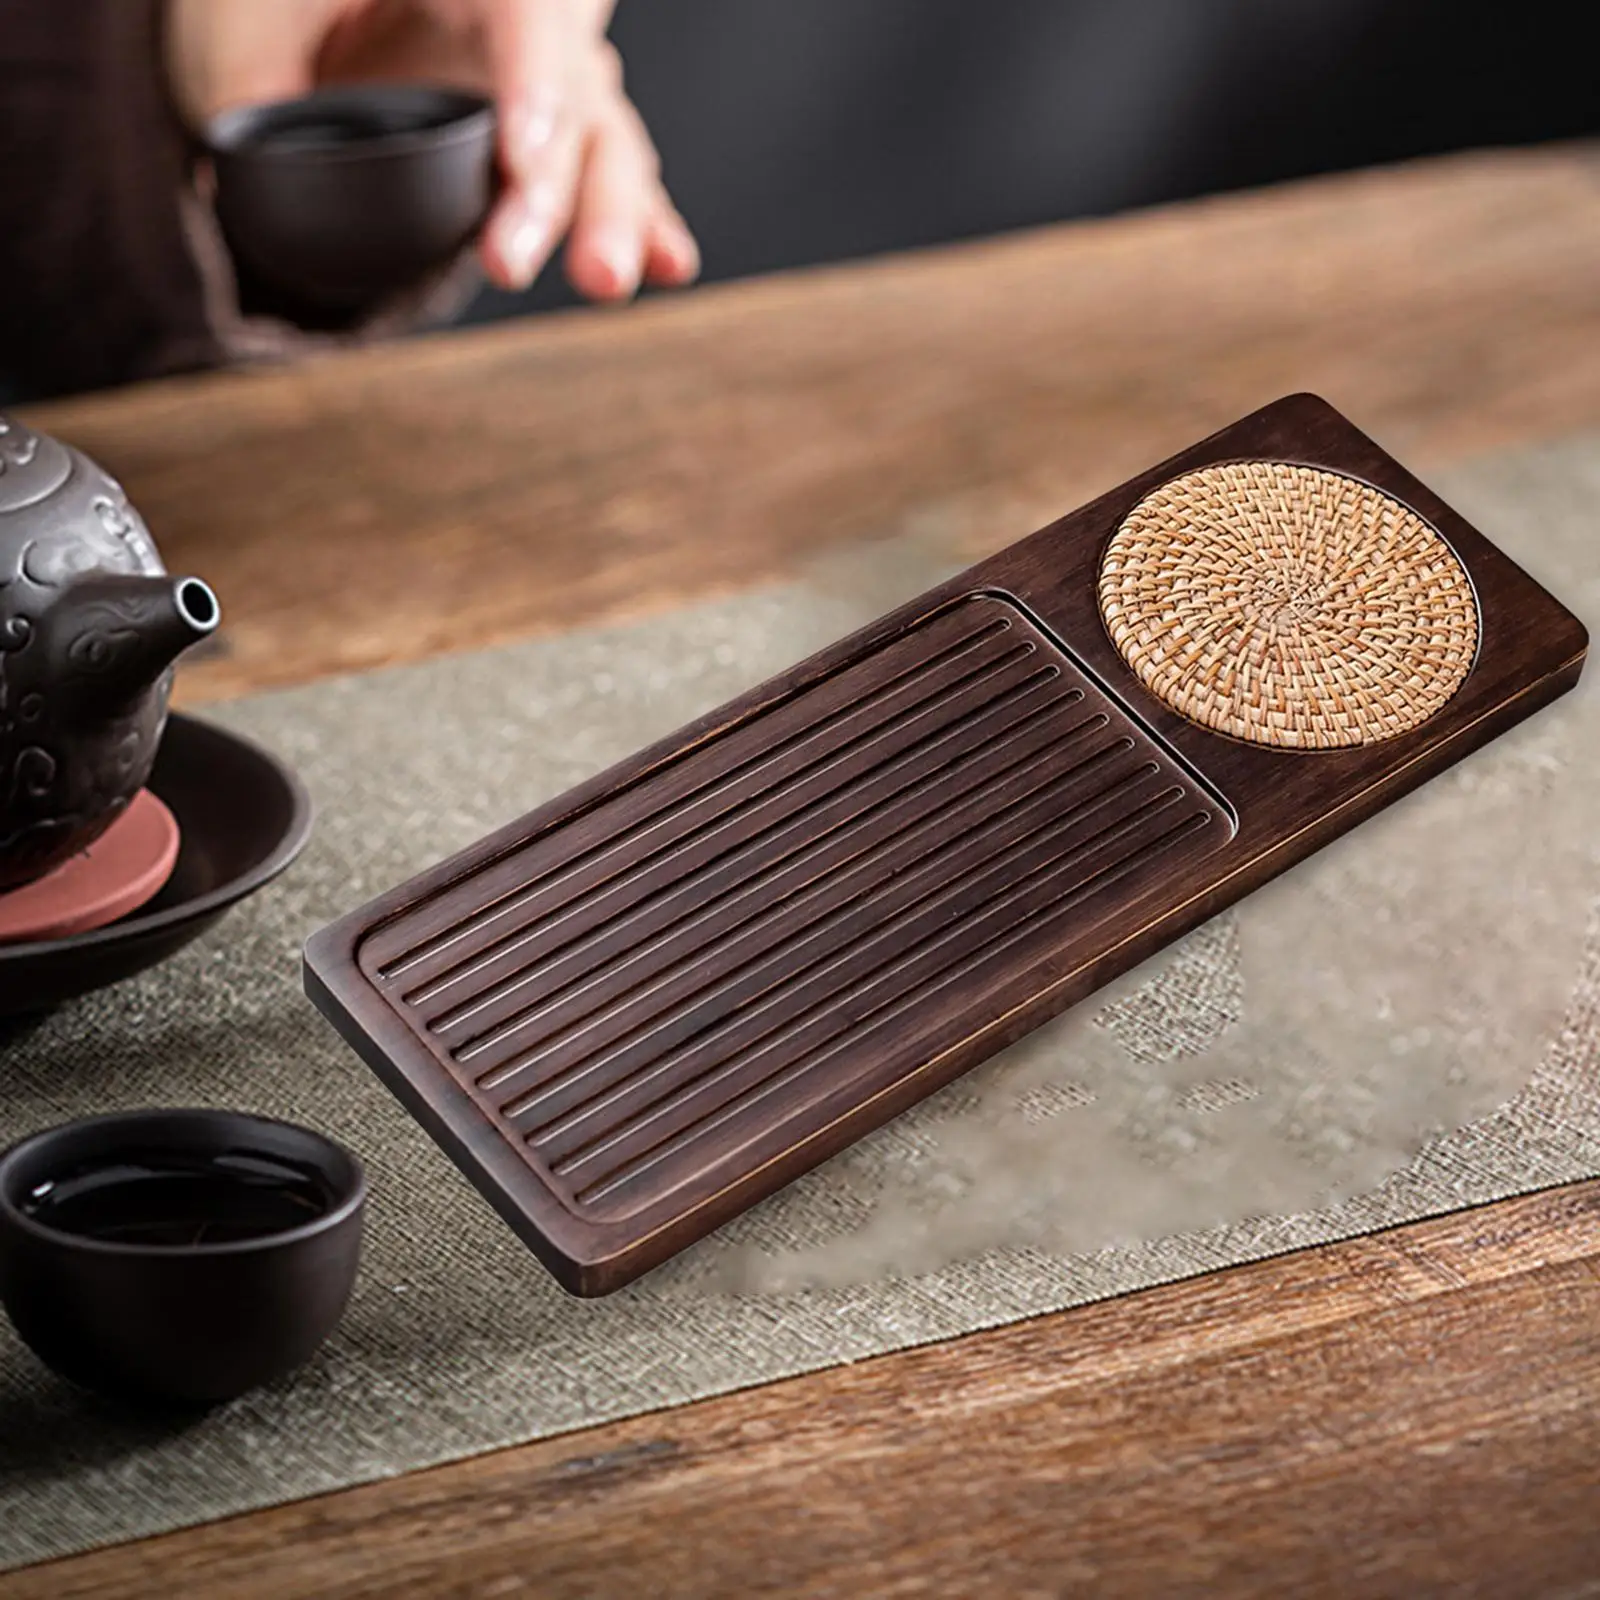 Rectangular Bamboo Chinese Tea Serving Tray Japanese Tea Serving Tray Household Tea Board for Travel Home Decoration Accessories